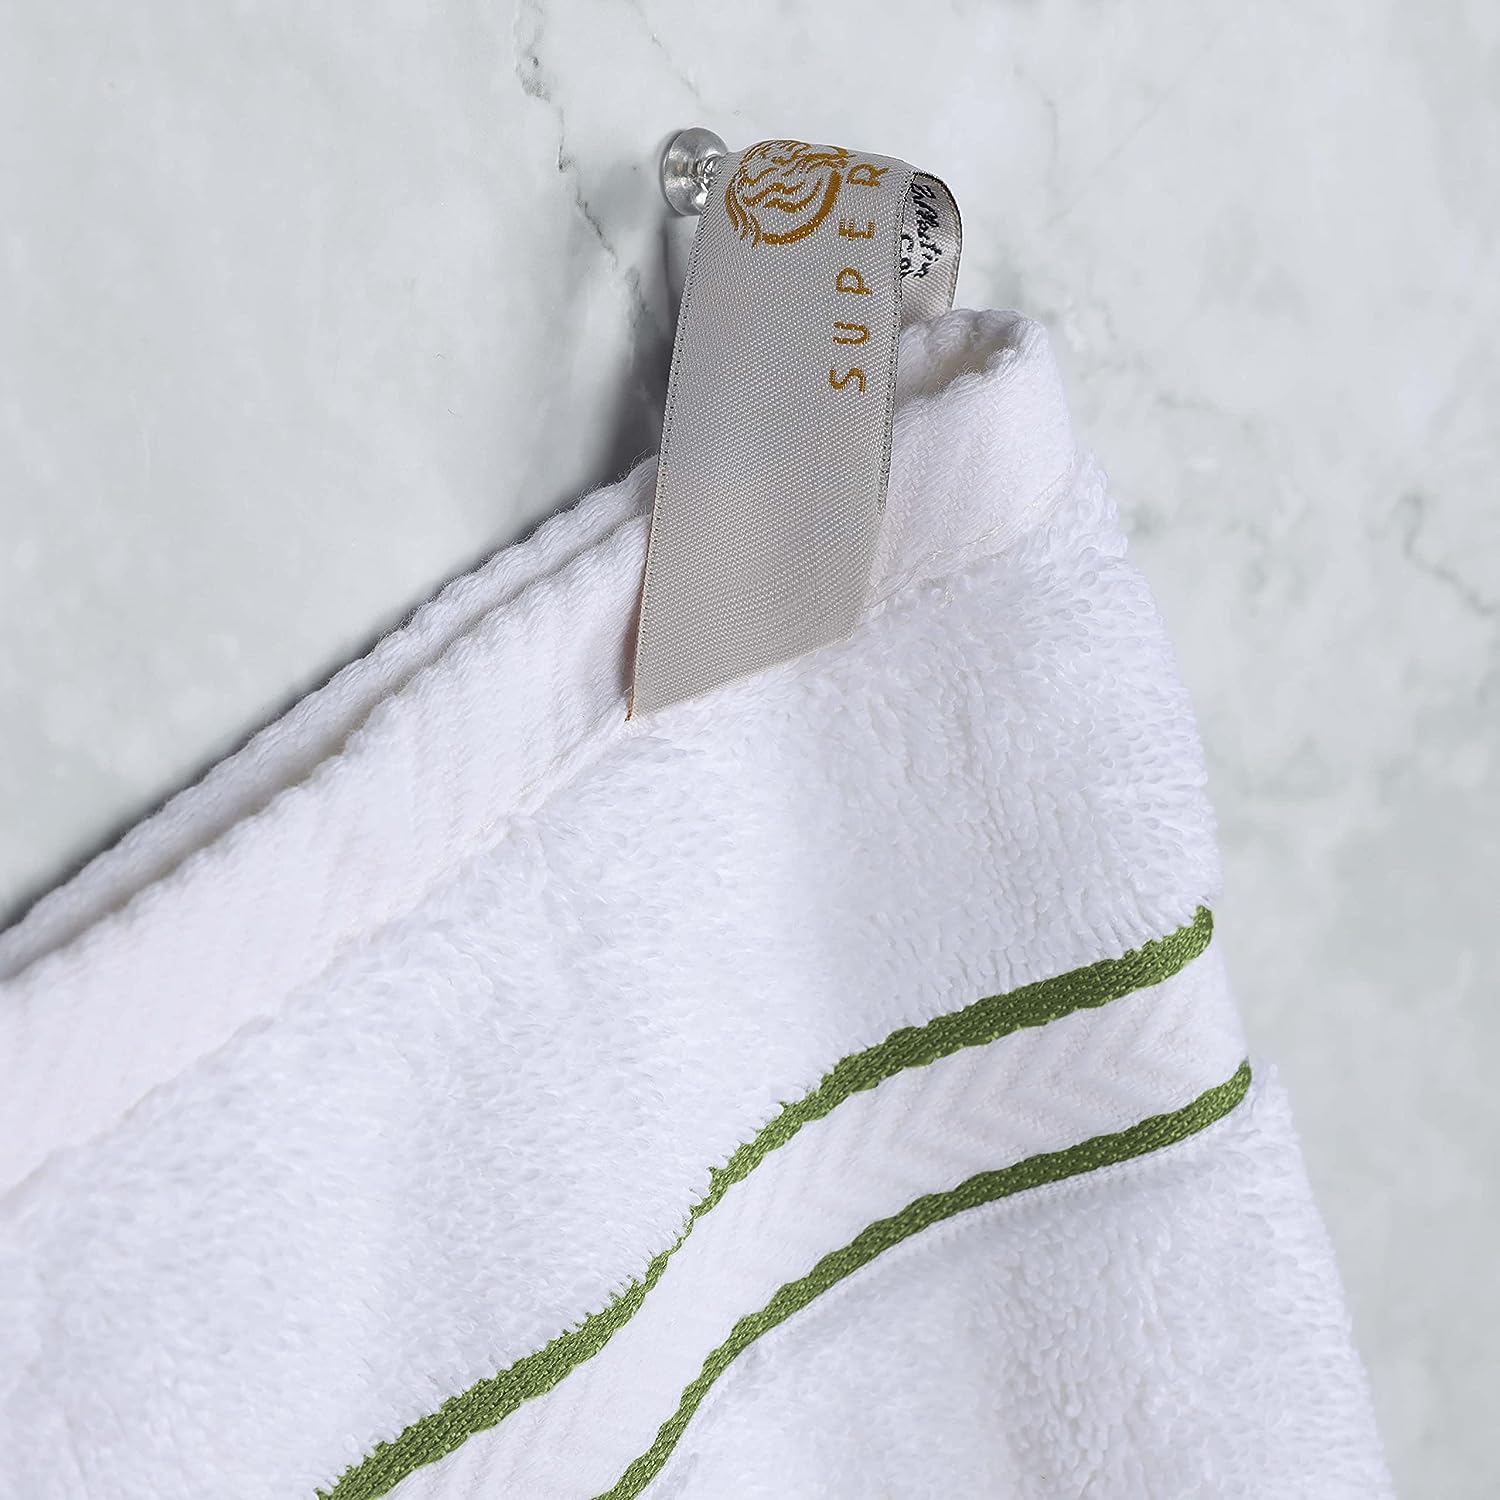 Superior Ultra-Plush Turkish Cotton Super Absorbent Solid Bath Towel Set of 4 - Forest Green